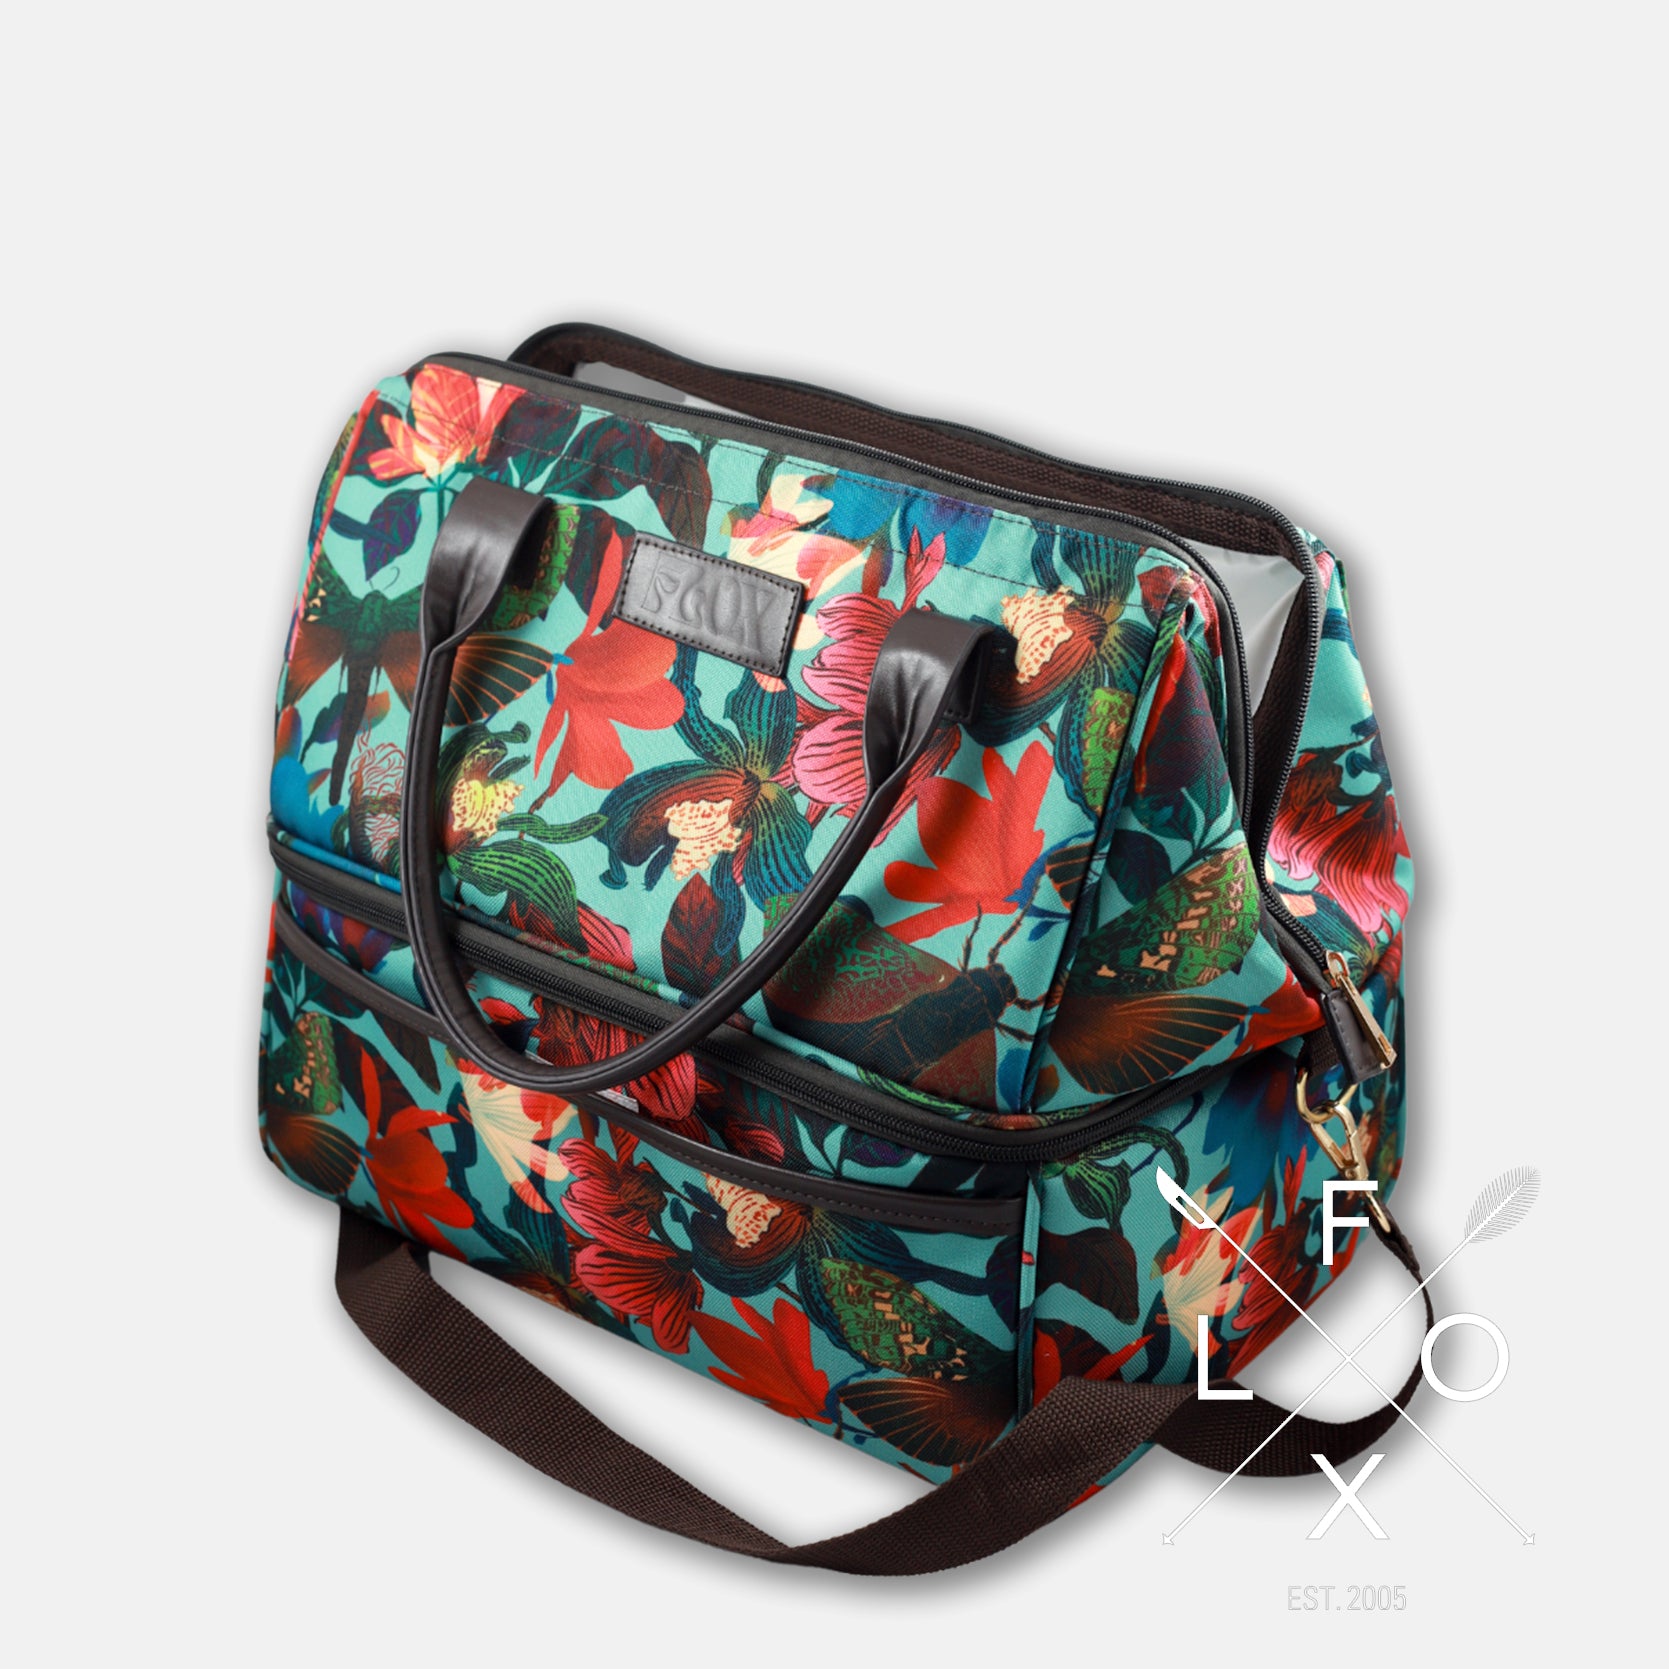 Colourful picnic cooler bag with teal blue background and magnolia flower print.